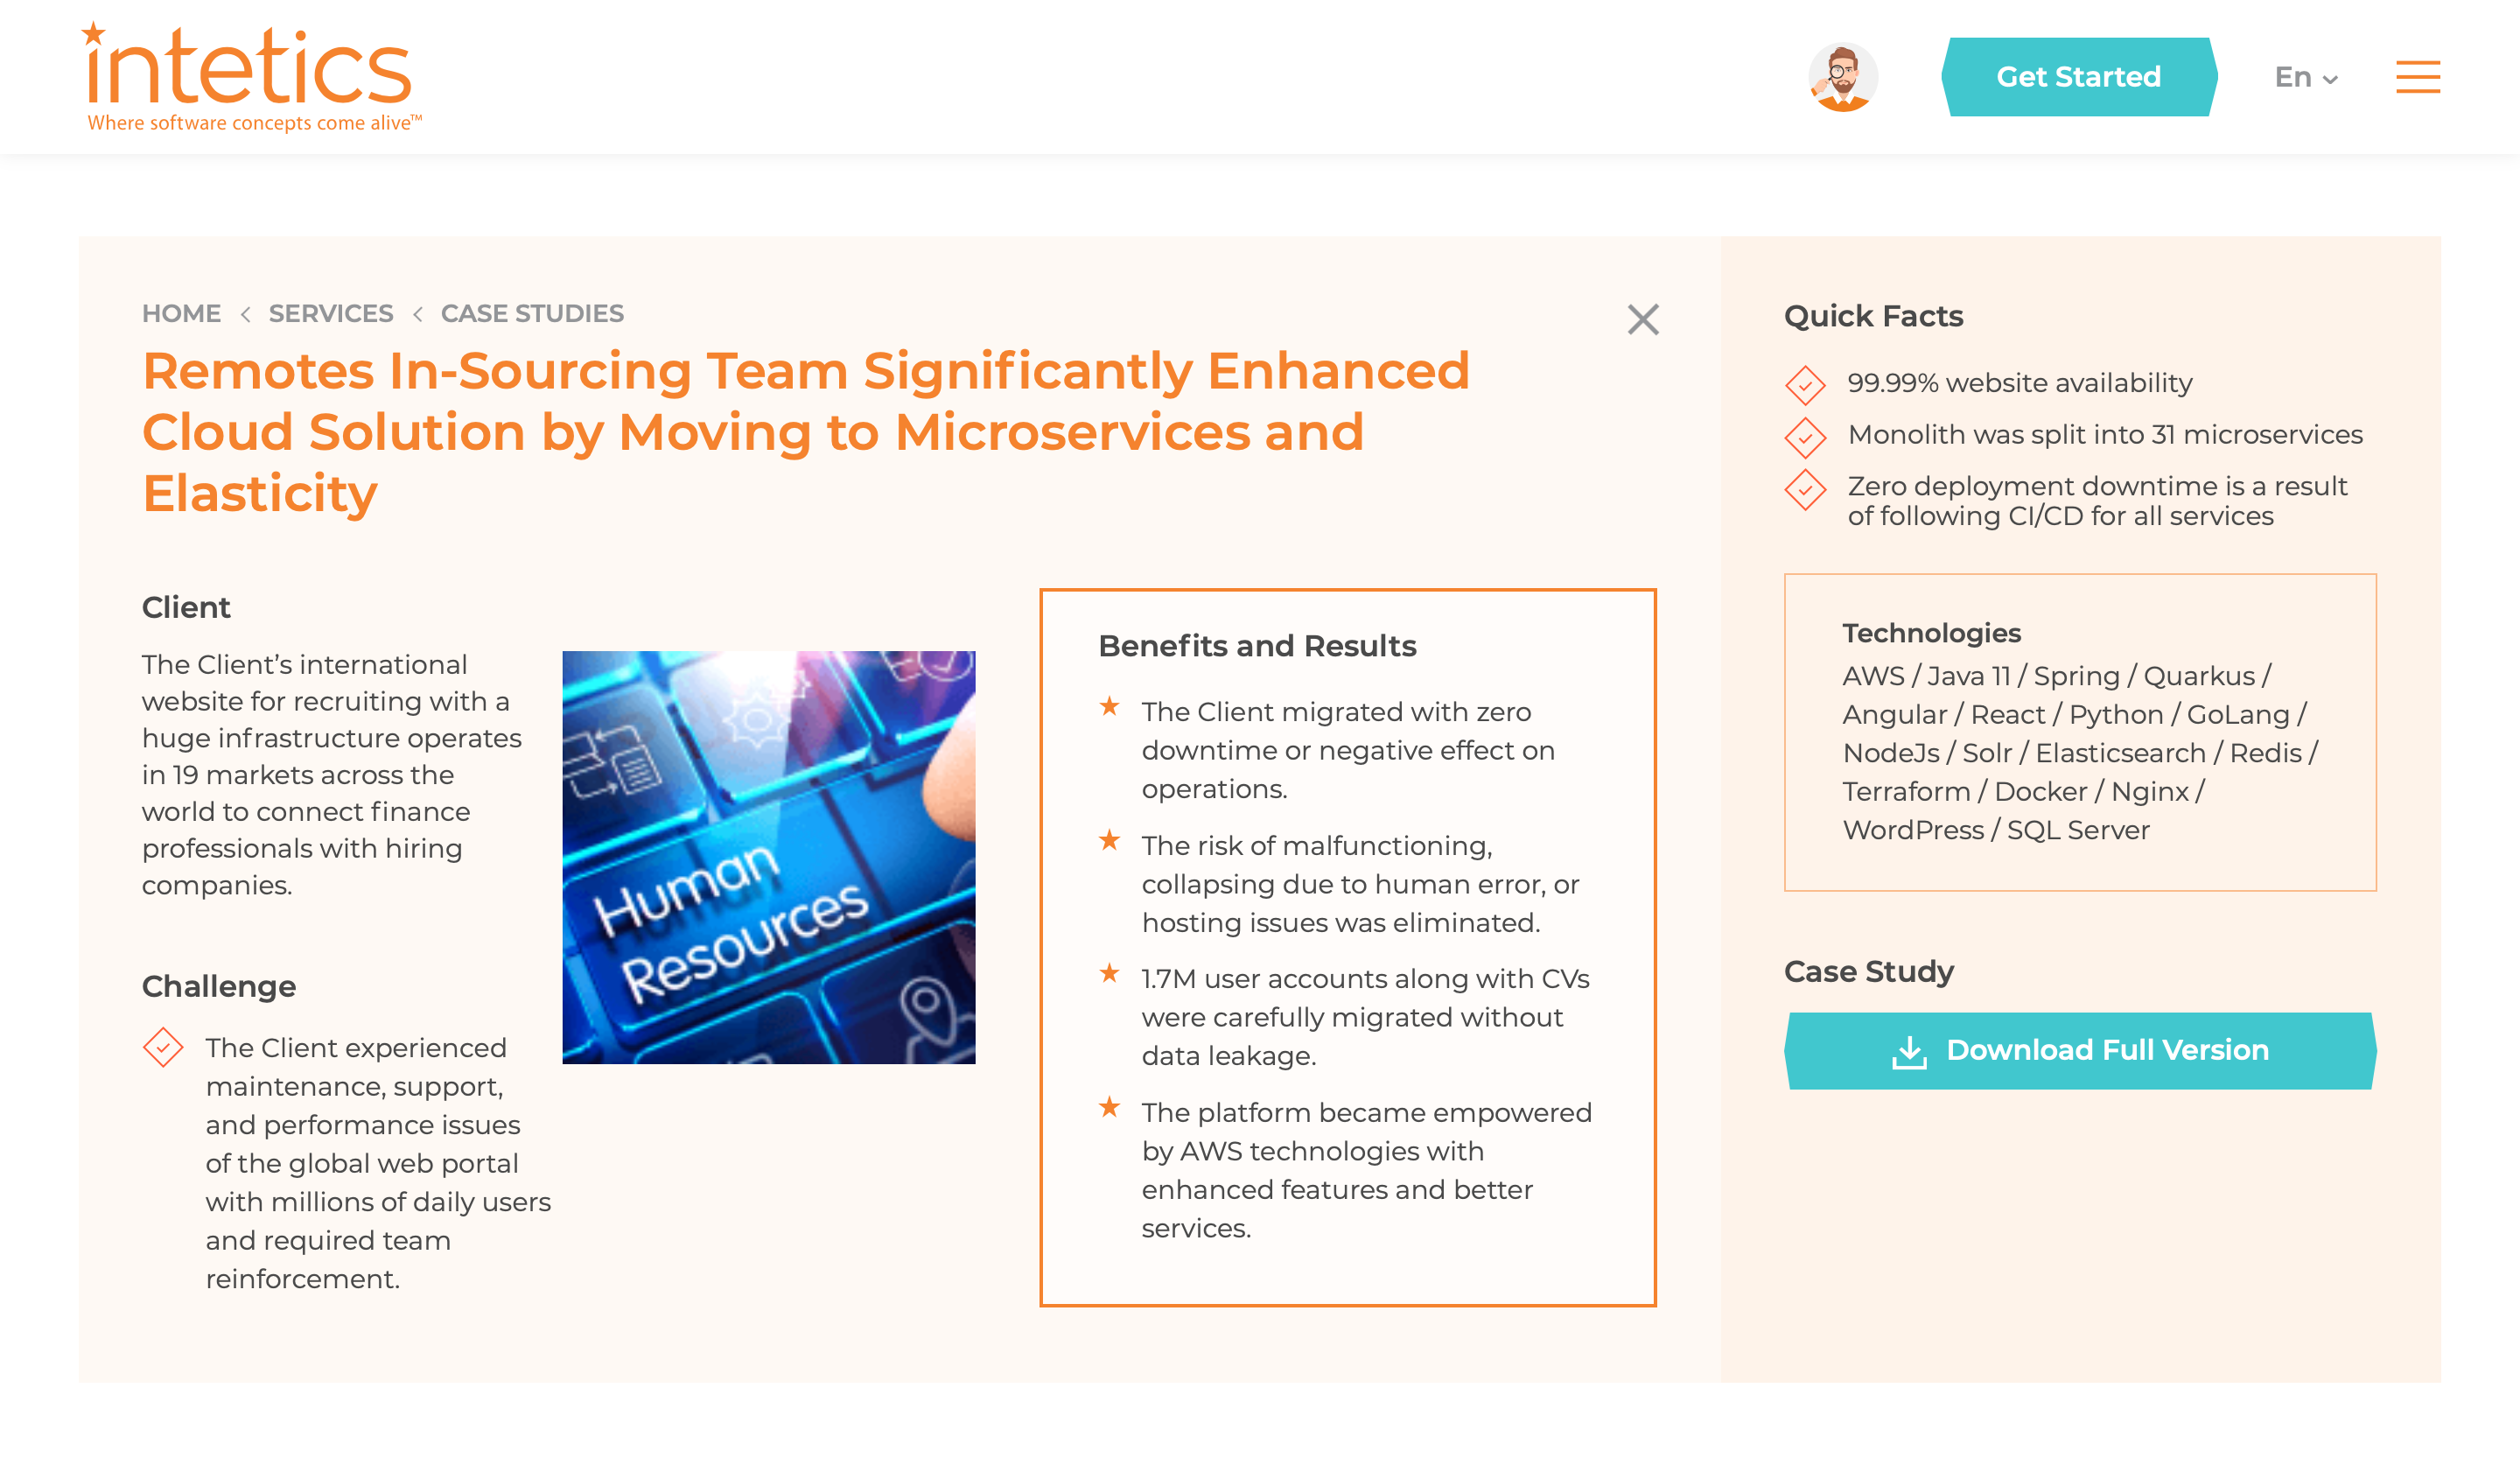 Remotes In-Sourcing Team Significantly Enhanced Cloud Solution by Moving to Microservices and Elasticity 